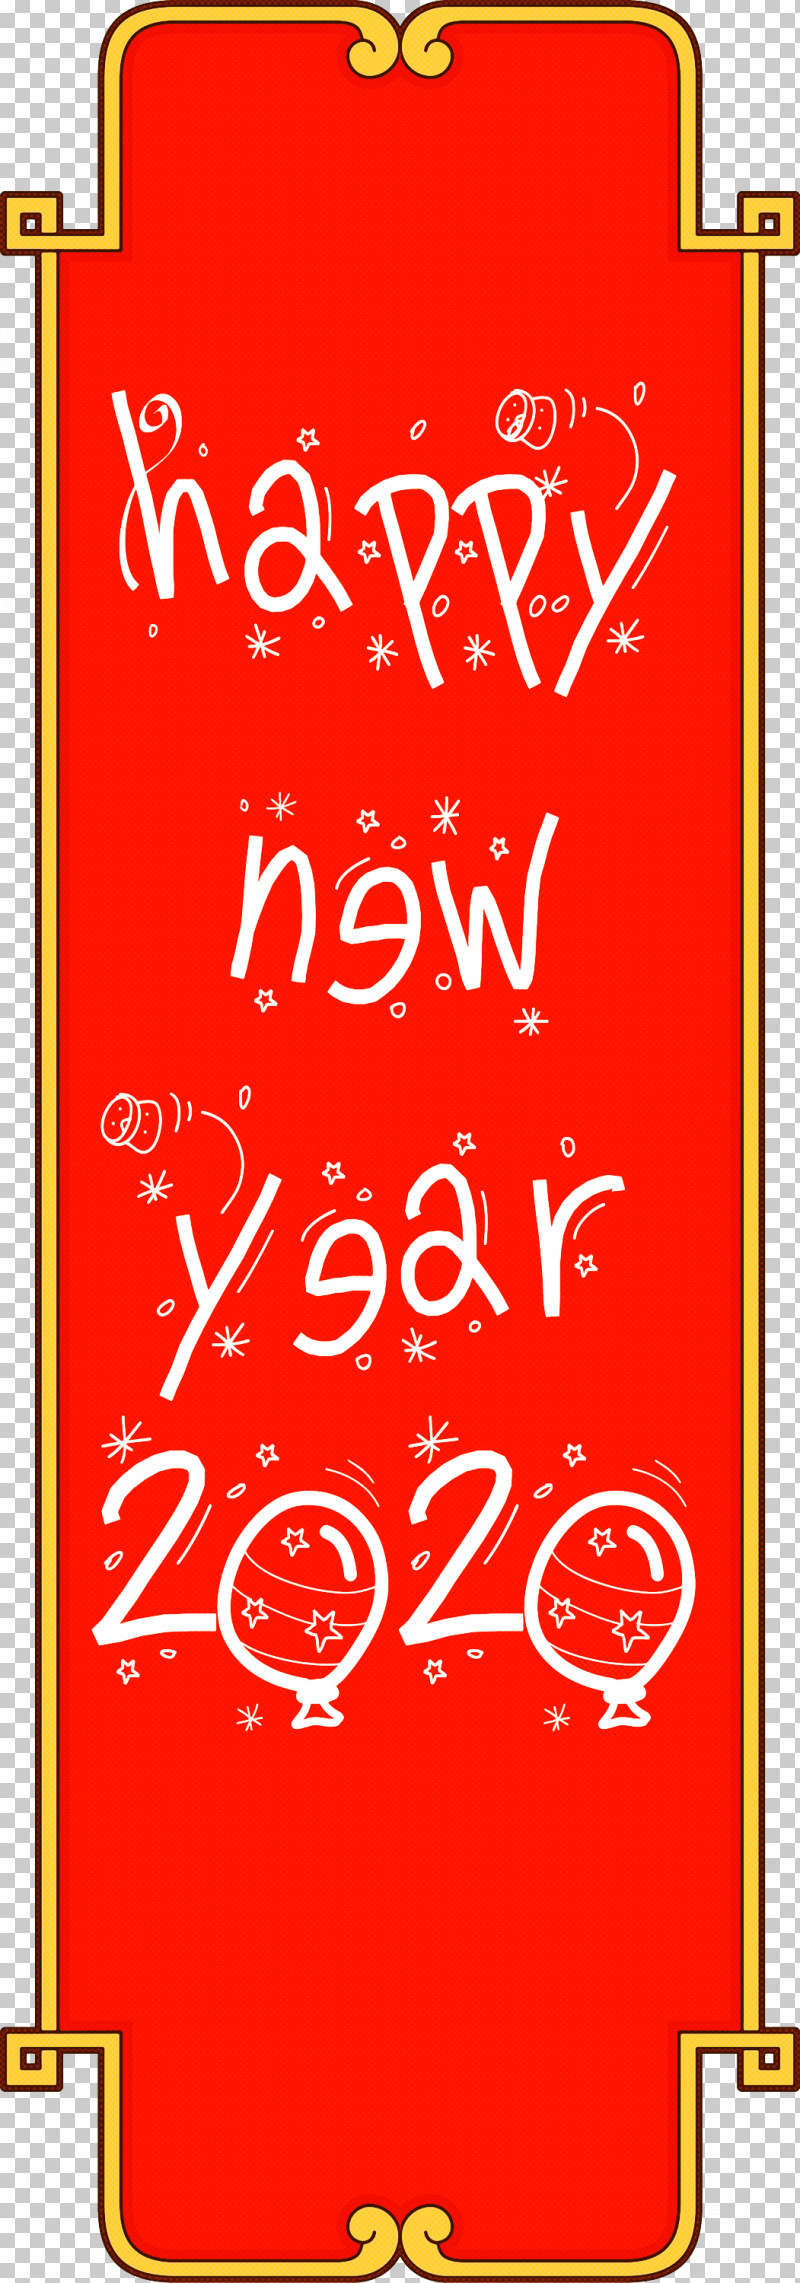 Happy New Year 2020 New Years 2020 2020 PNG, Clipart, 2020, Calligraphy, Happy New Year 2020, New Years 2020, Poster Free PNG Download